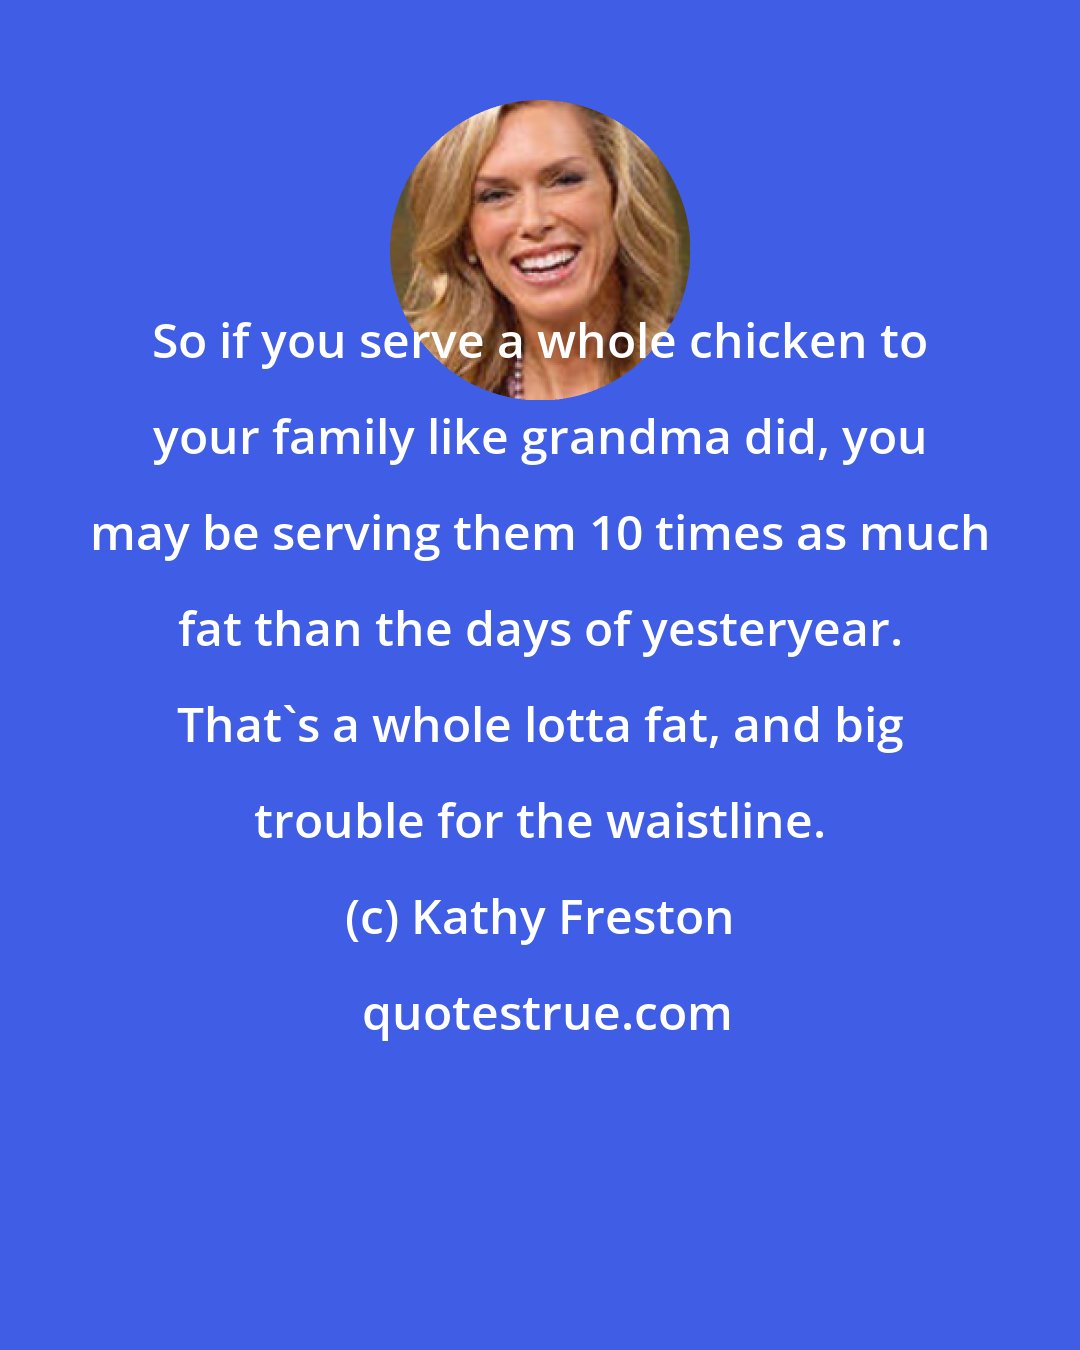 Kathy Freston: So if you serve a whole chicken to your family like grandma did, you may be serving them 10 times as much fat than the days of yesteryear. That's a whole lotta fat, and big trouble for the waistline.